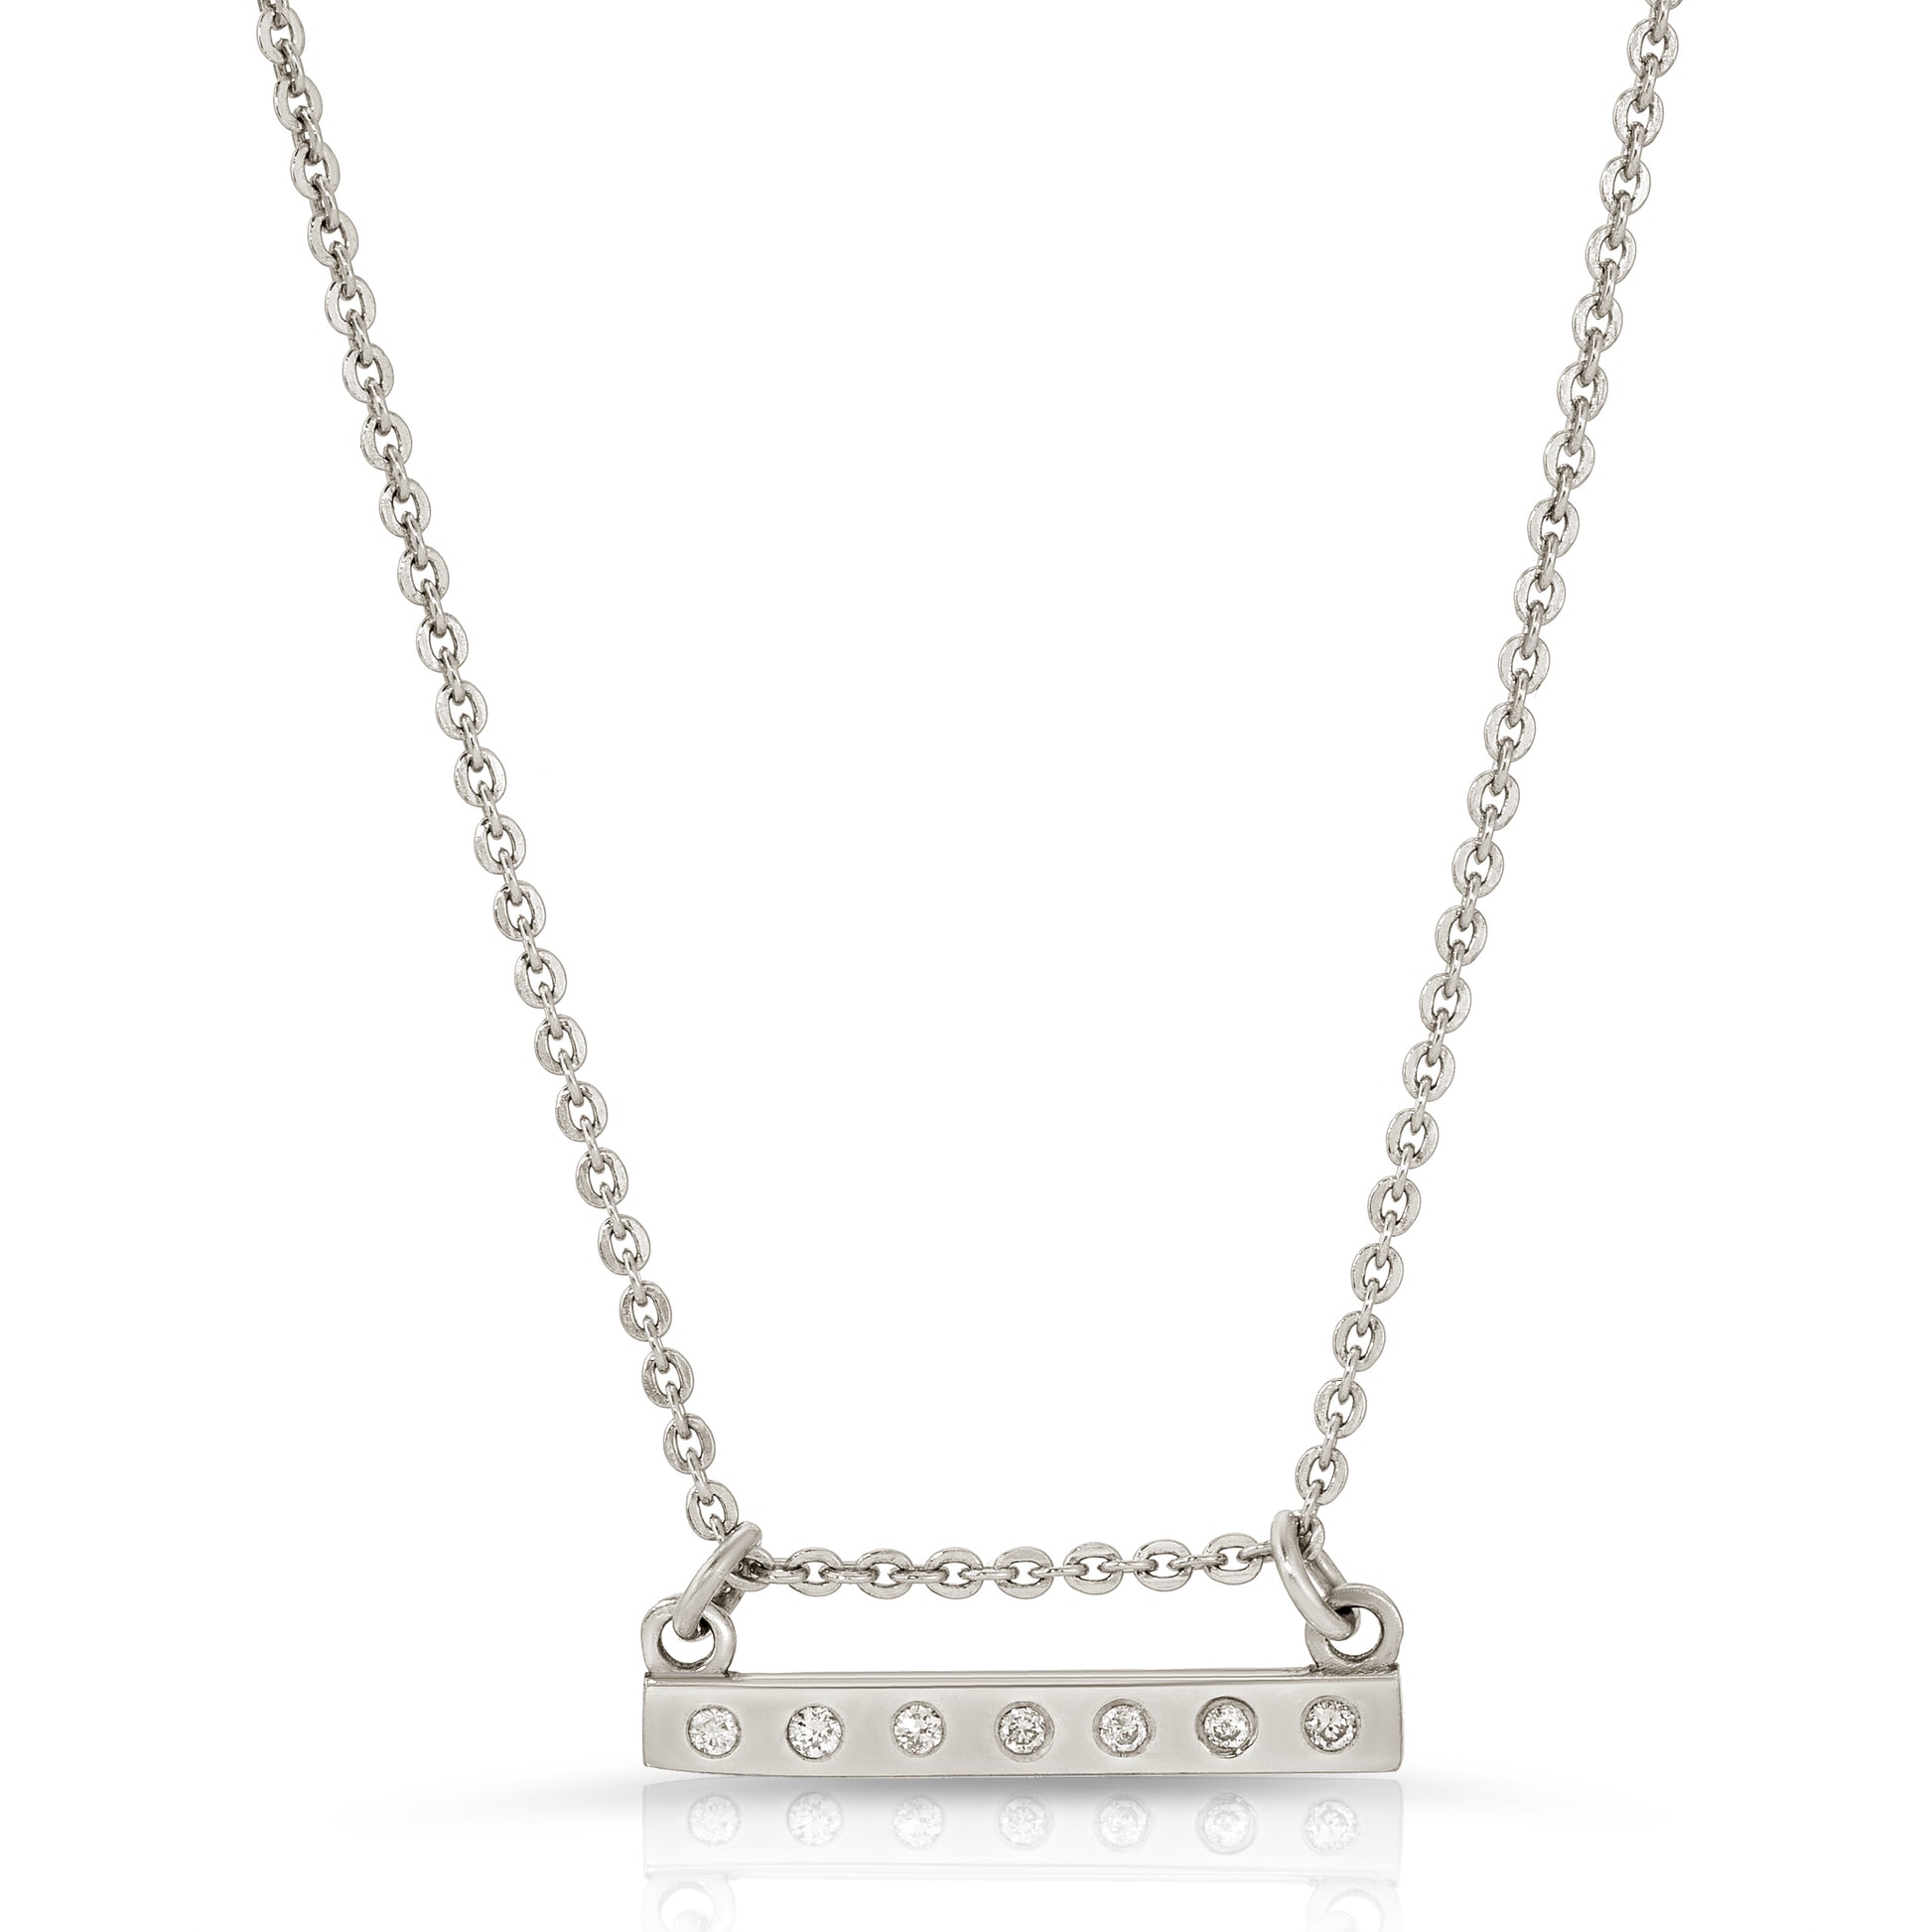 18K solid gold Horizontal bar necklace with 7 diamonds from the wandering jewel